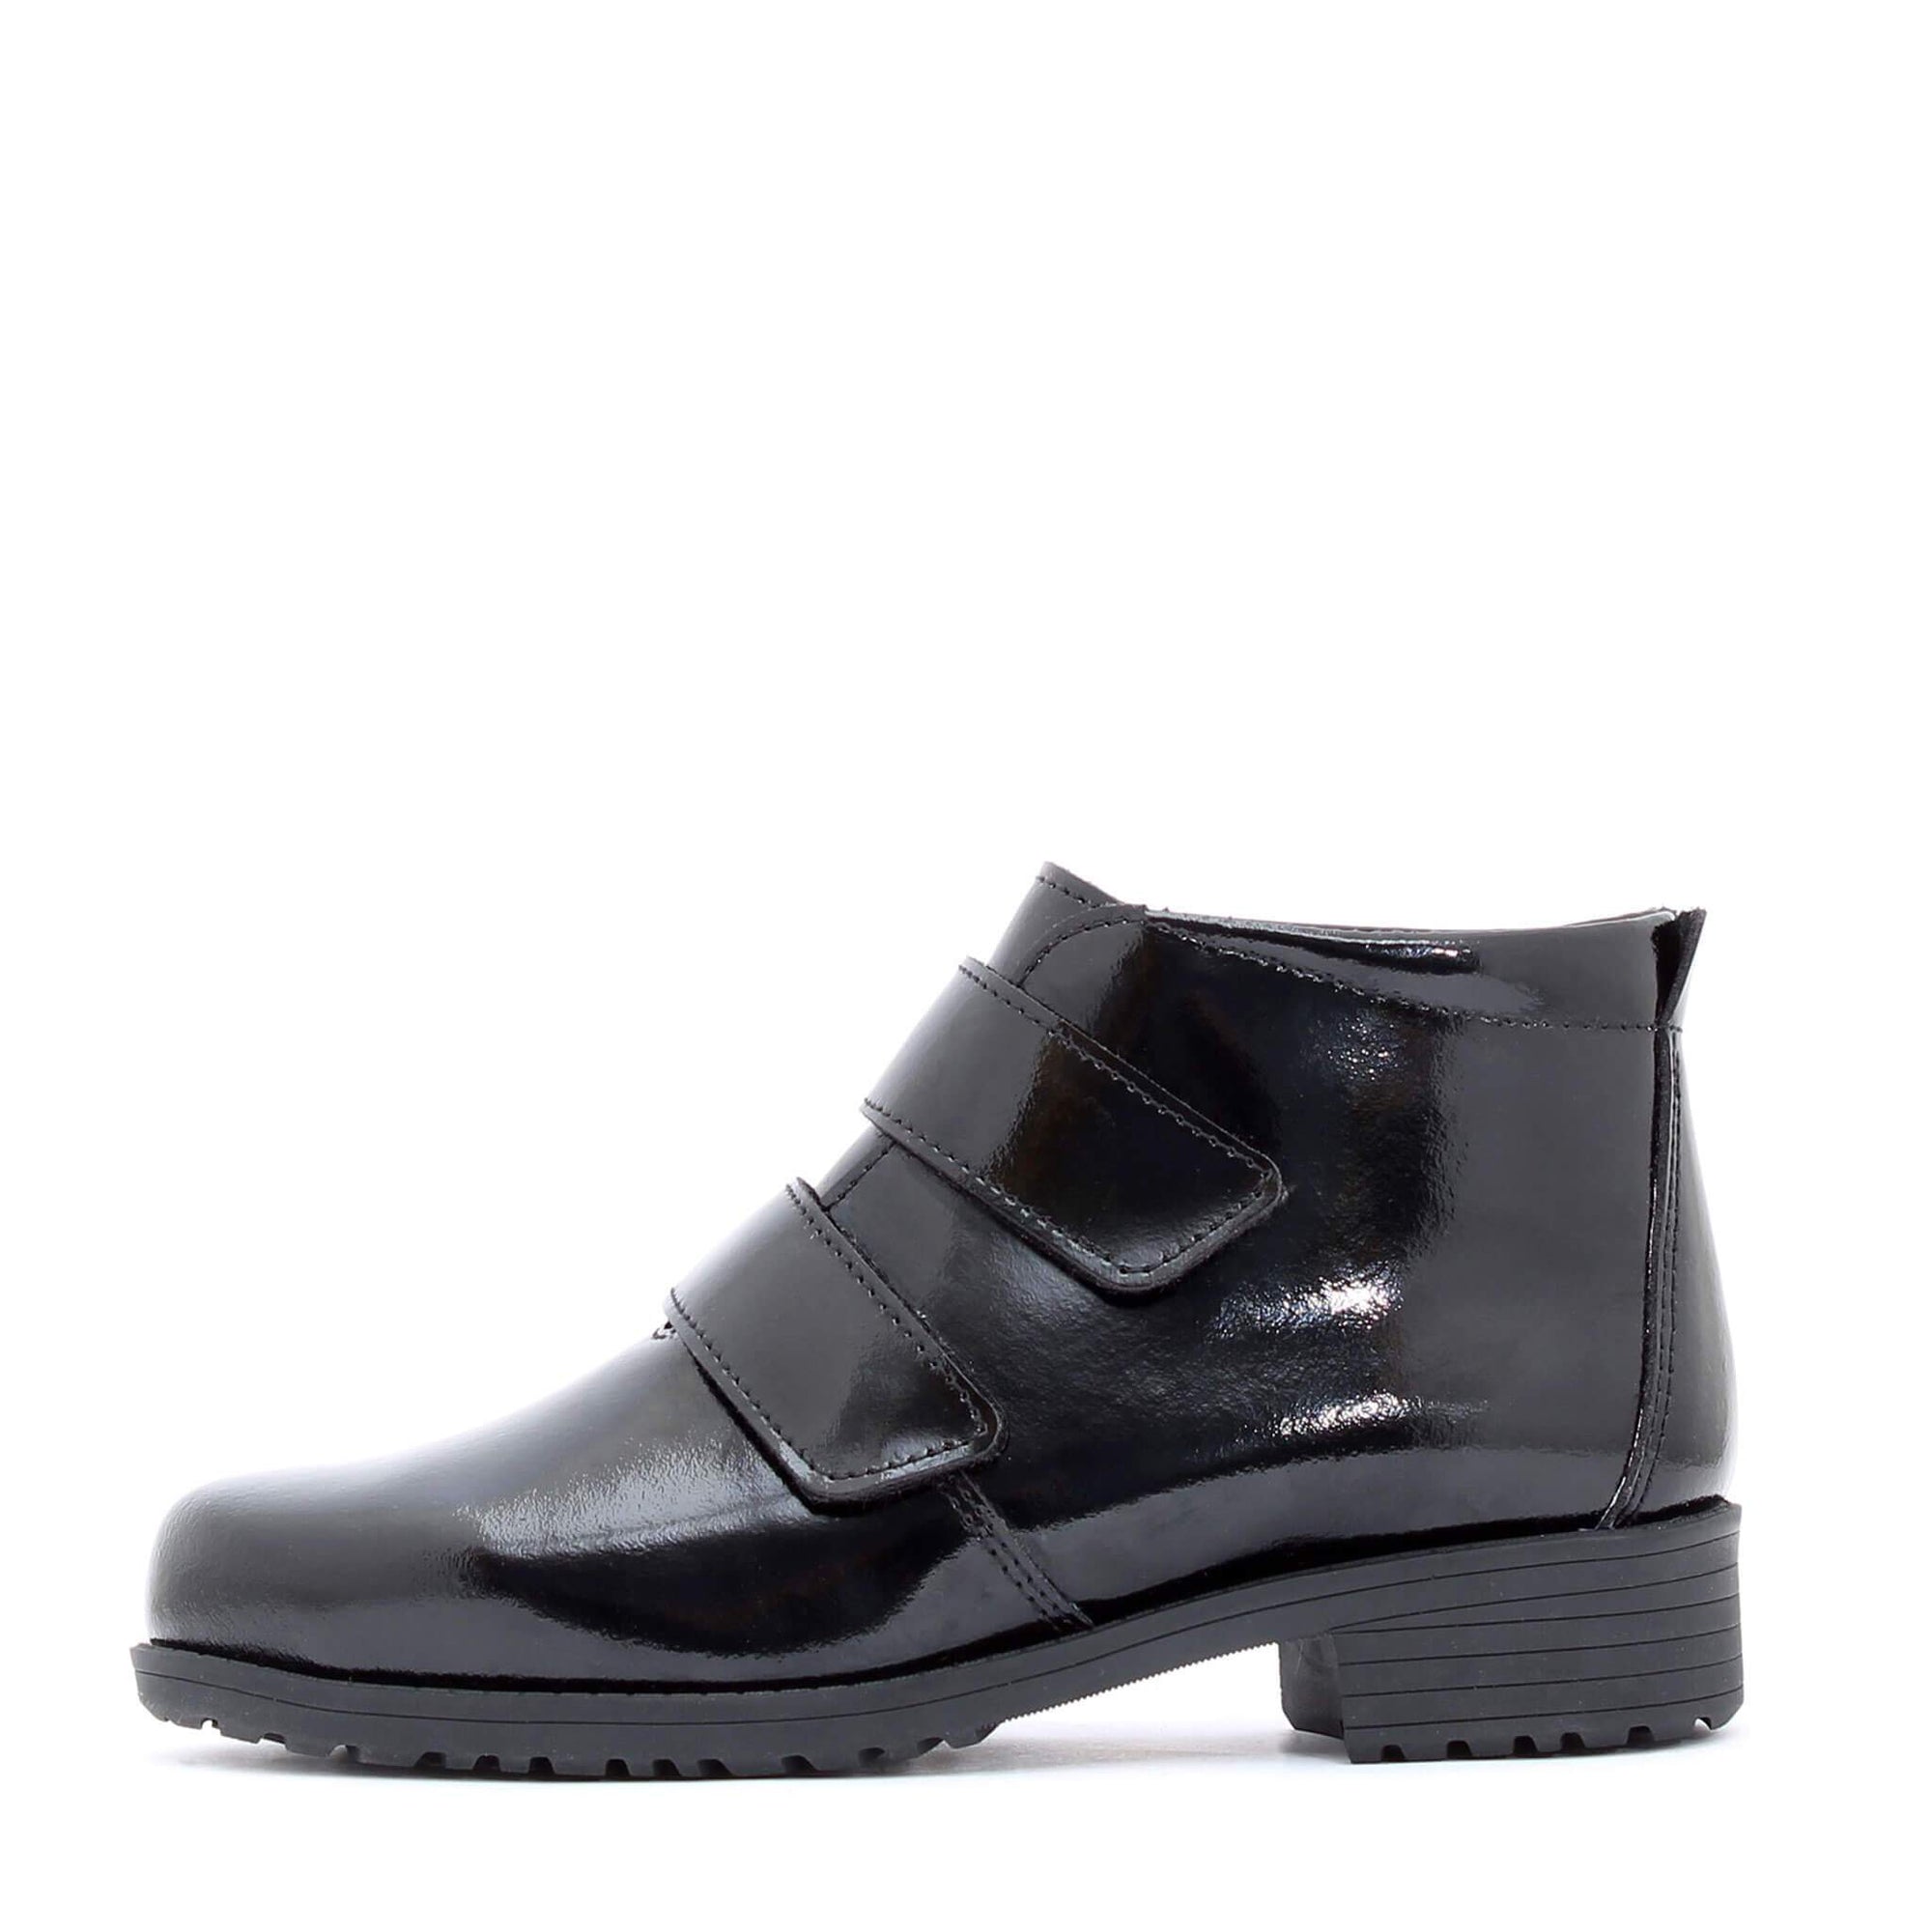 Polly winter boot for women - Black Patent 